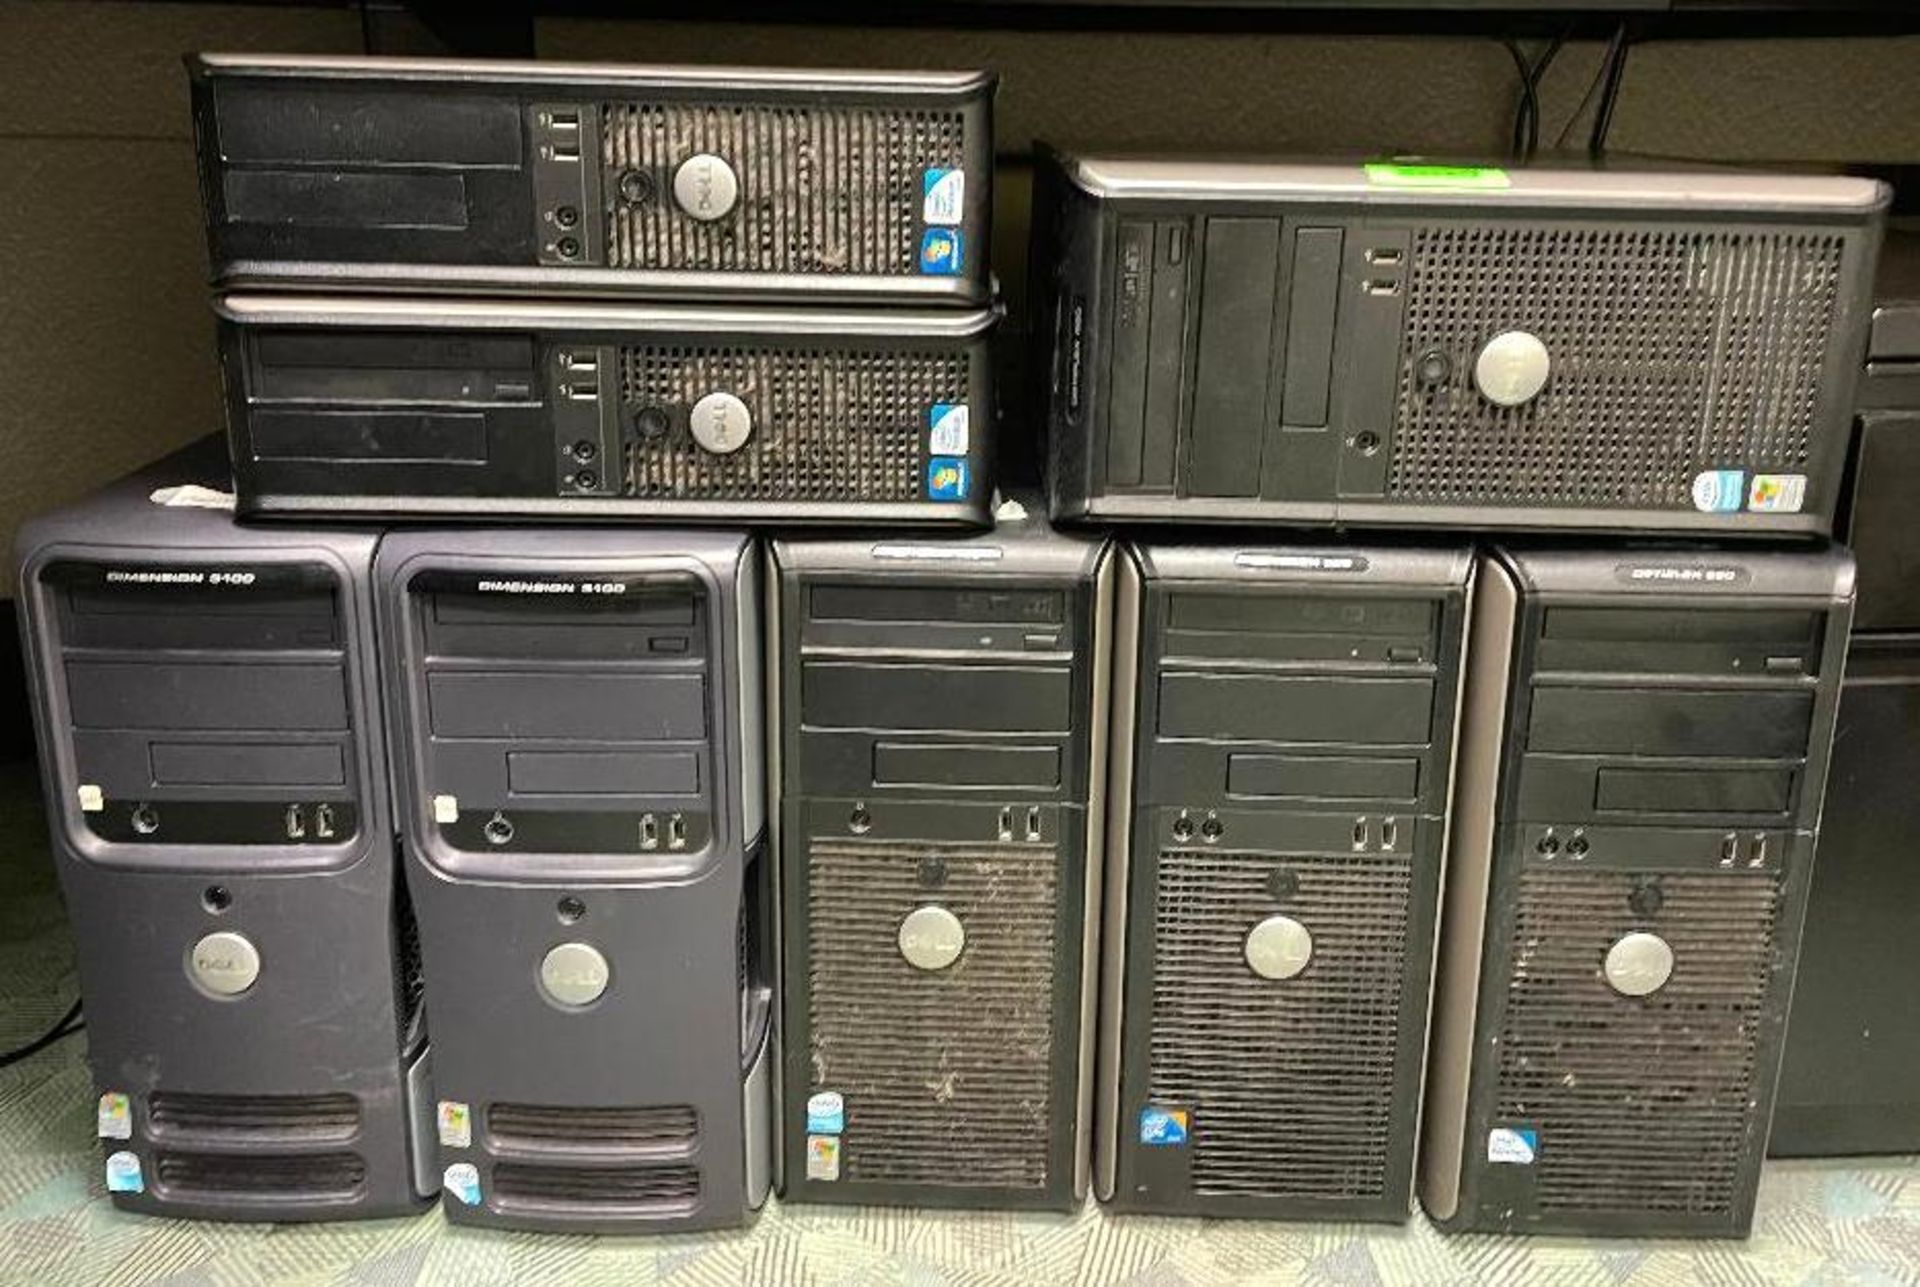 DESCRIPTION ASSORTED DELL DESKTOP TOWERS (NO HARDRIVES) LOCATION FIRST FLOOR: SOUTH WING THIS LOT IS